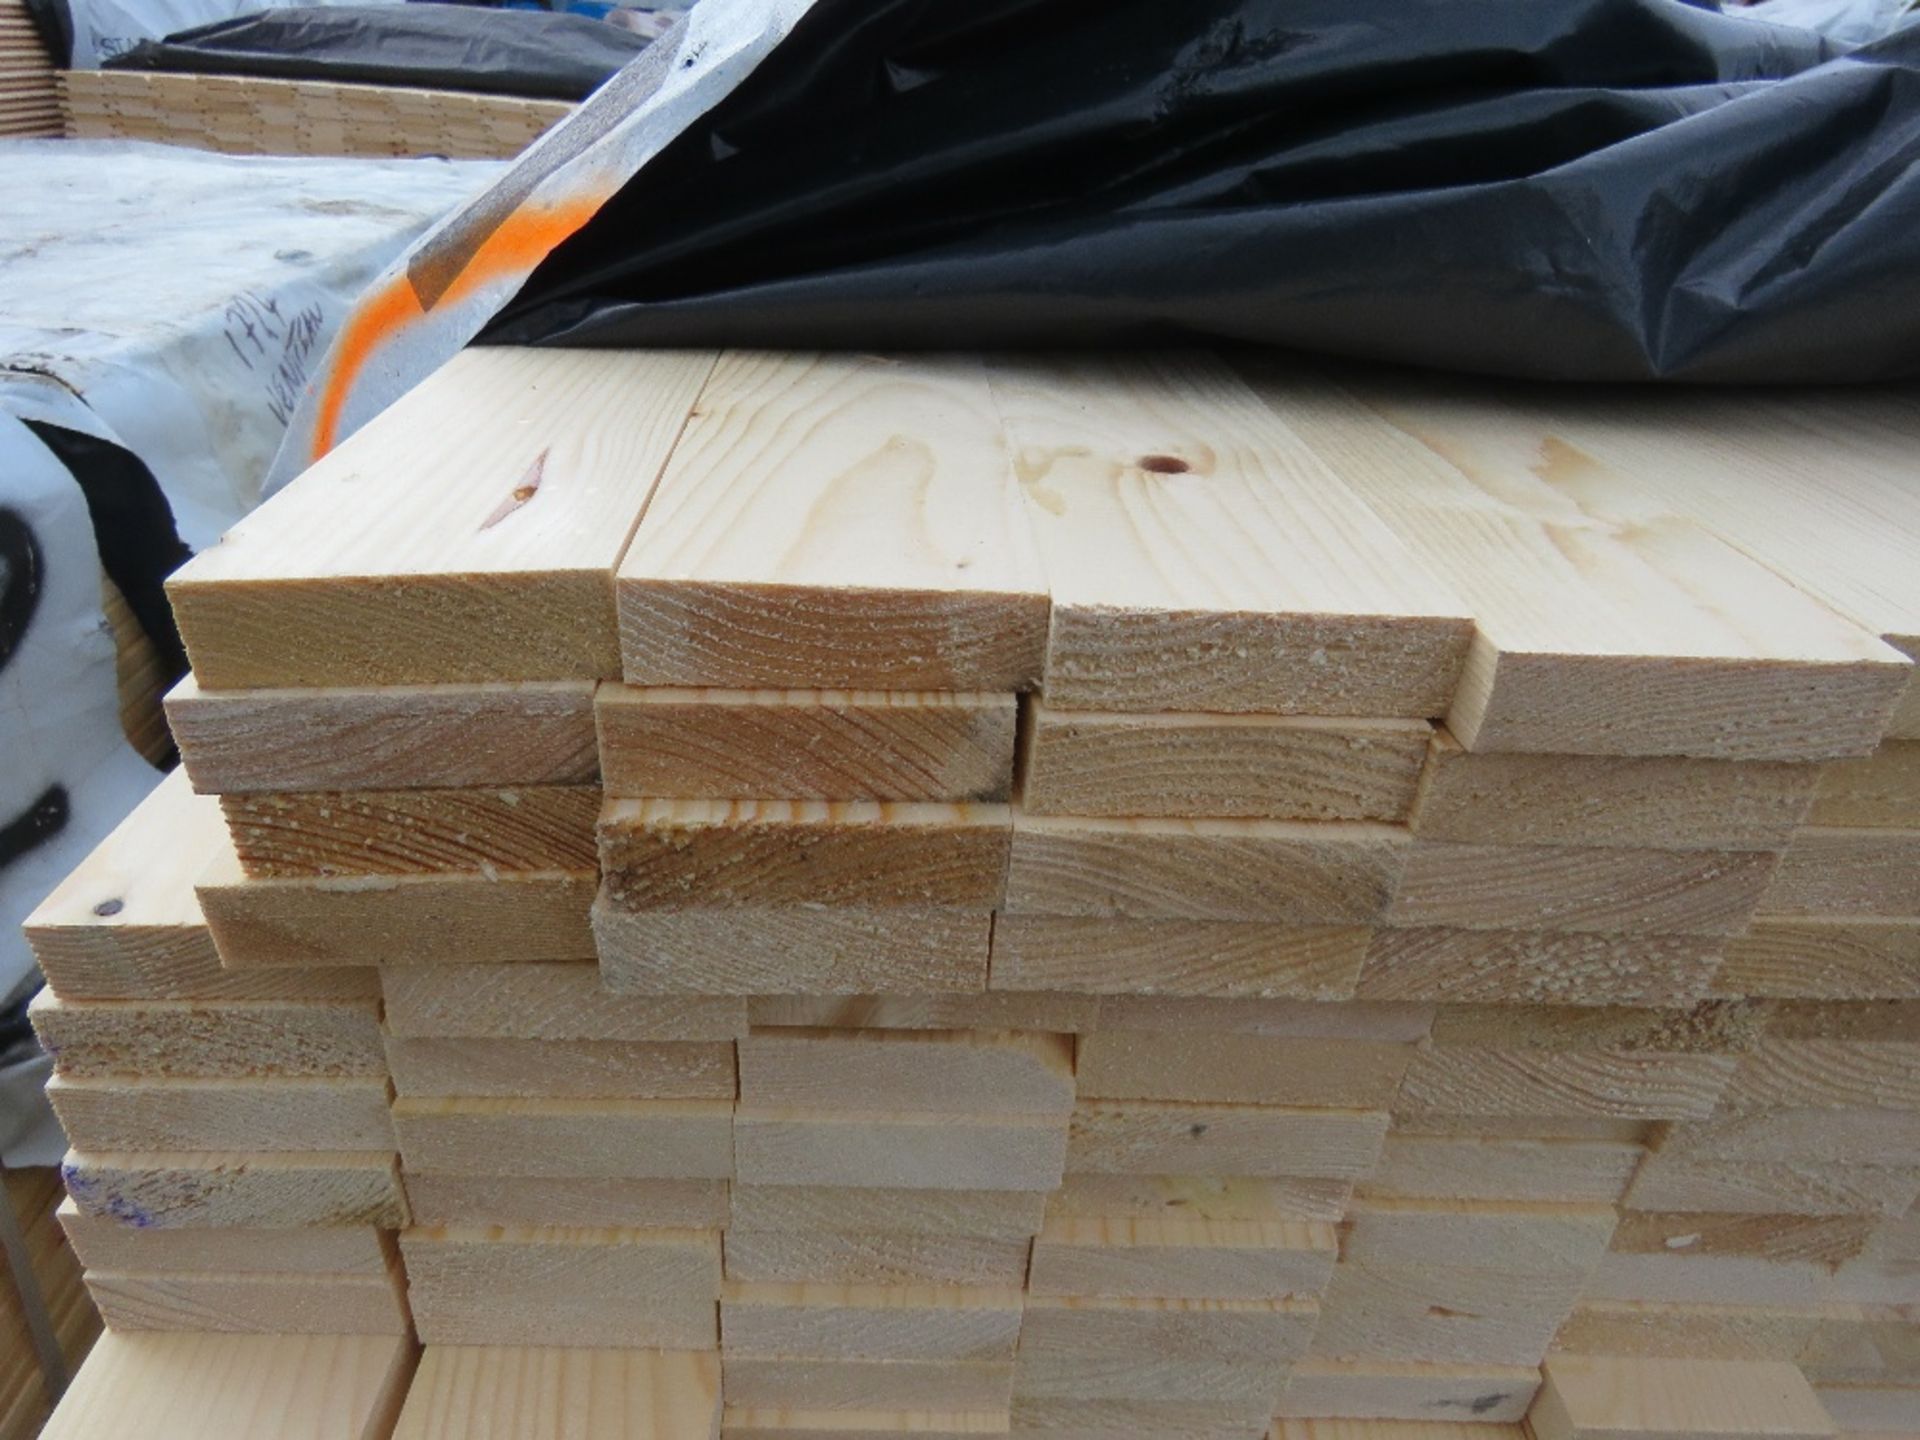 PACK OF UNTREATED TIMBER FENCE CLADDING SLATS: 1.8M LENGTH X 70MM X 20MM WIDTH APPROX. - Image 3 of 3